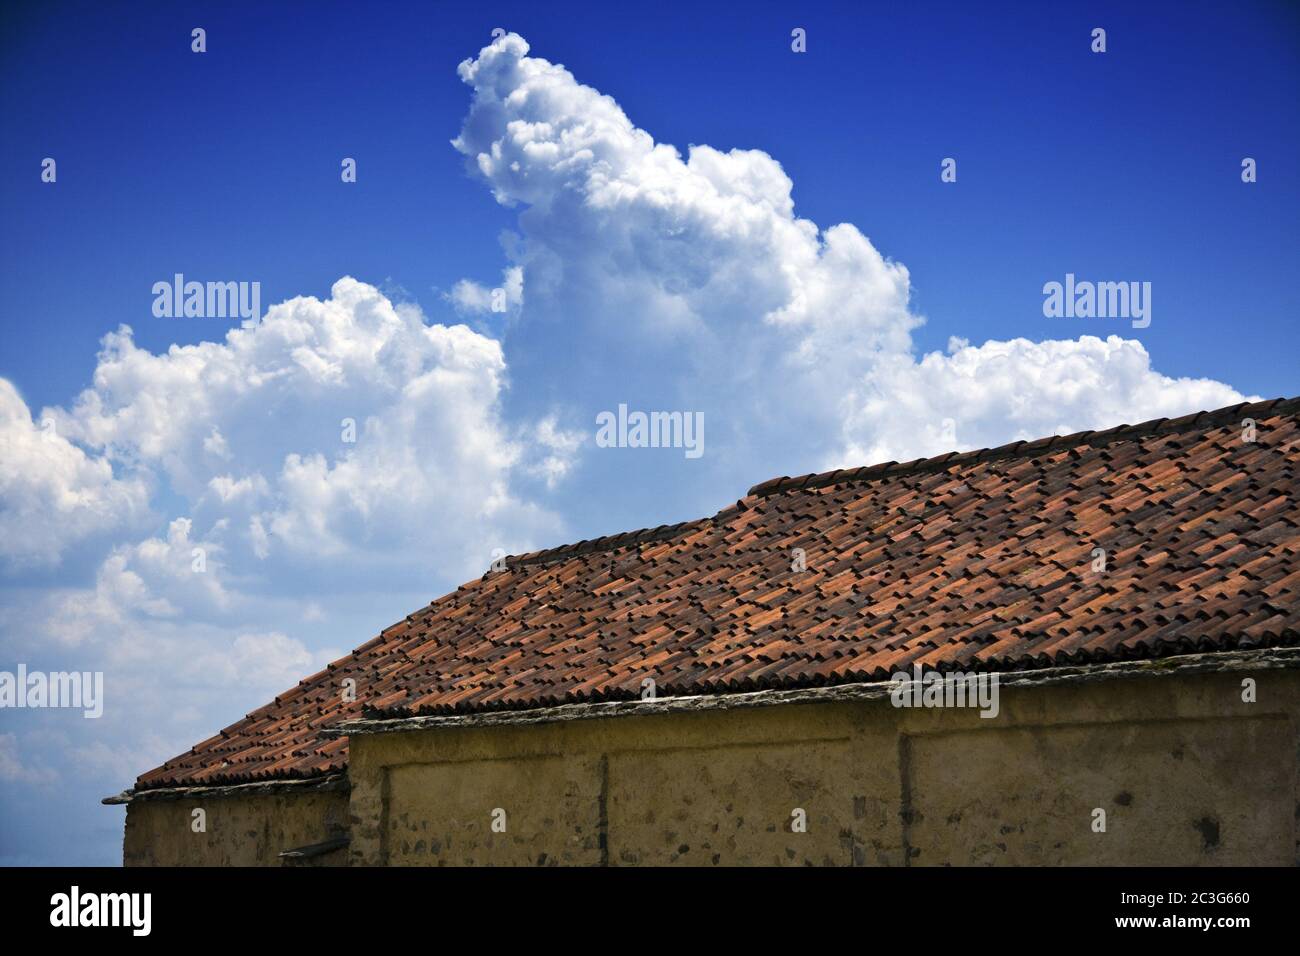 Low angle shot of old roof tiles of a building with a cloudy blue sky in the background Stock Photo